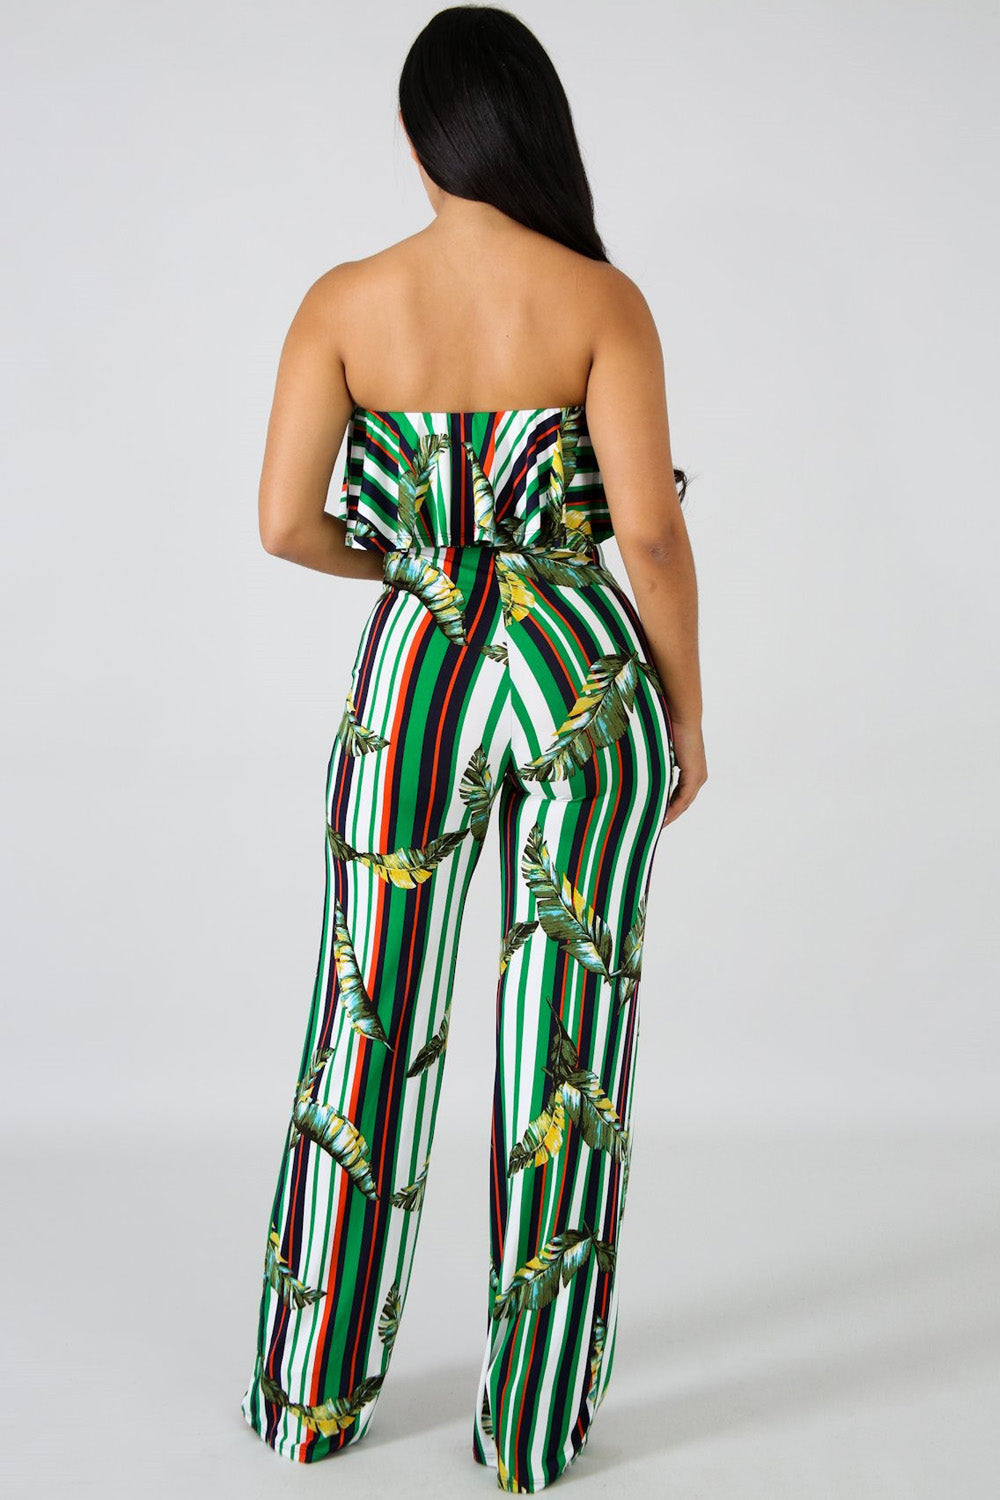 goPals strapless jumpsuit with all over leaf print. 